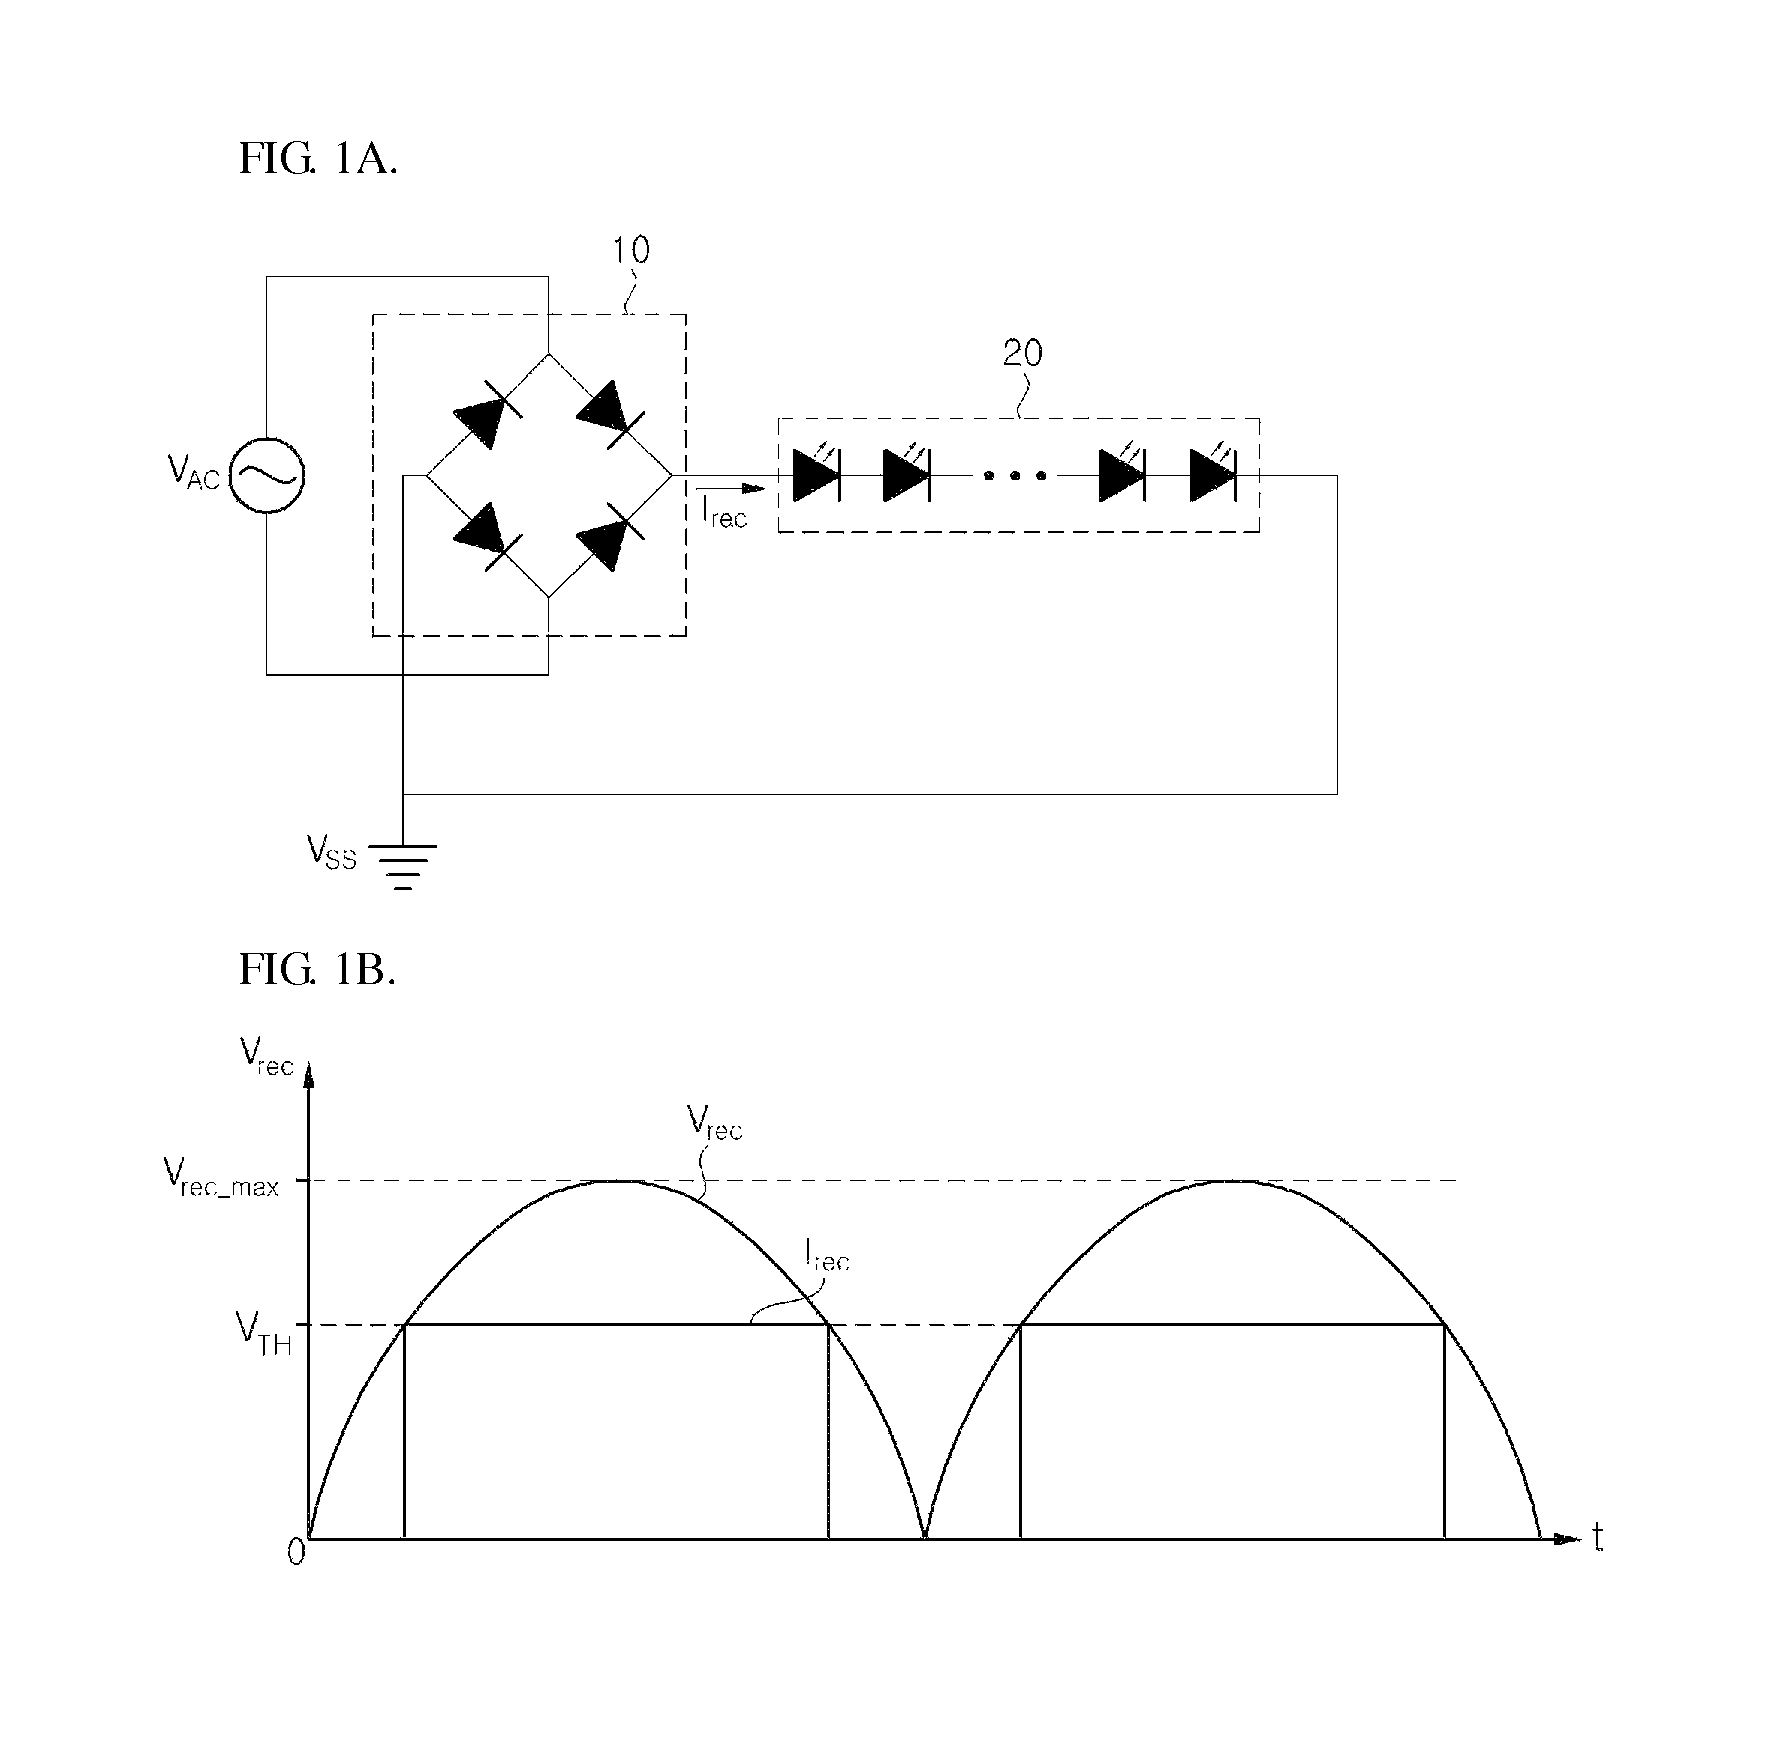 LED lighting apparatus with improved total harmonic distortion in source current